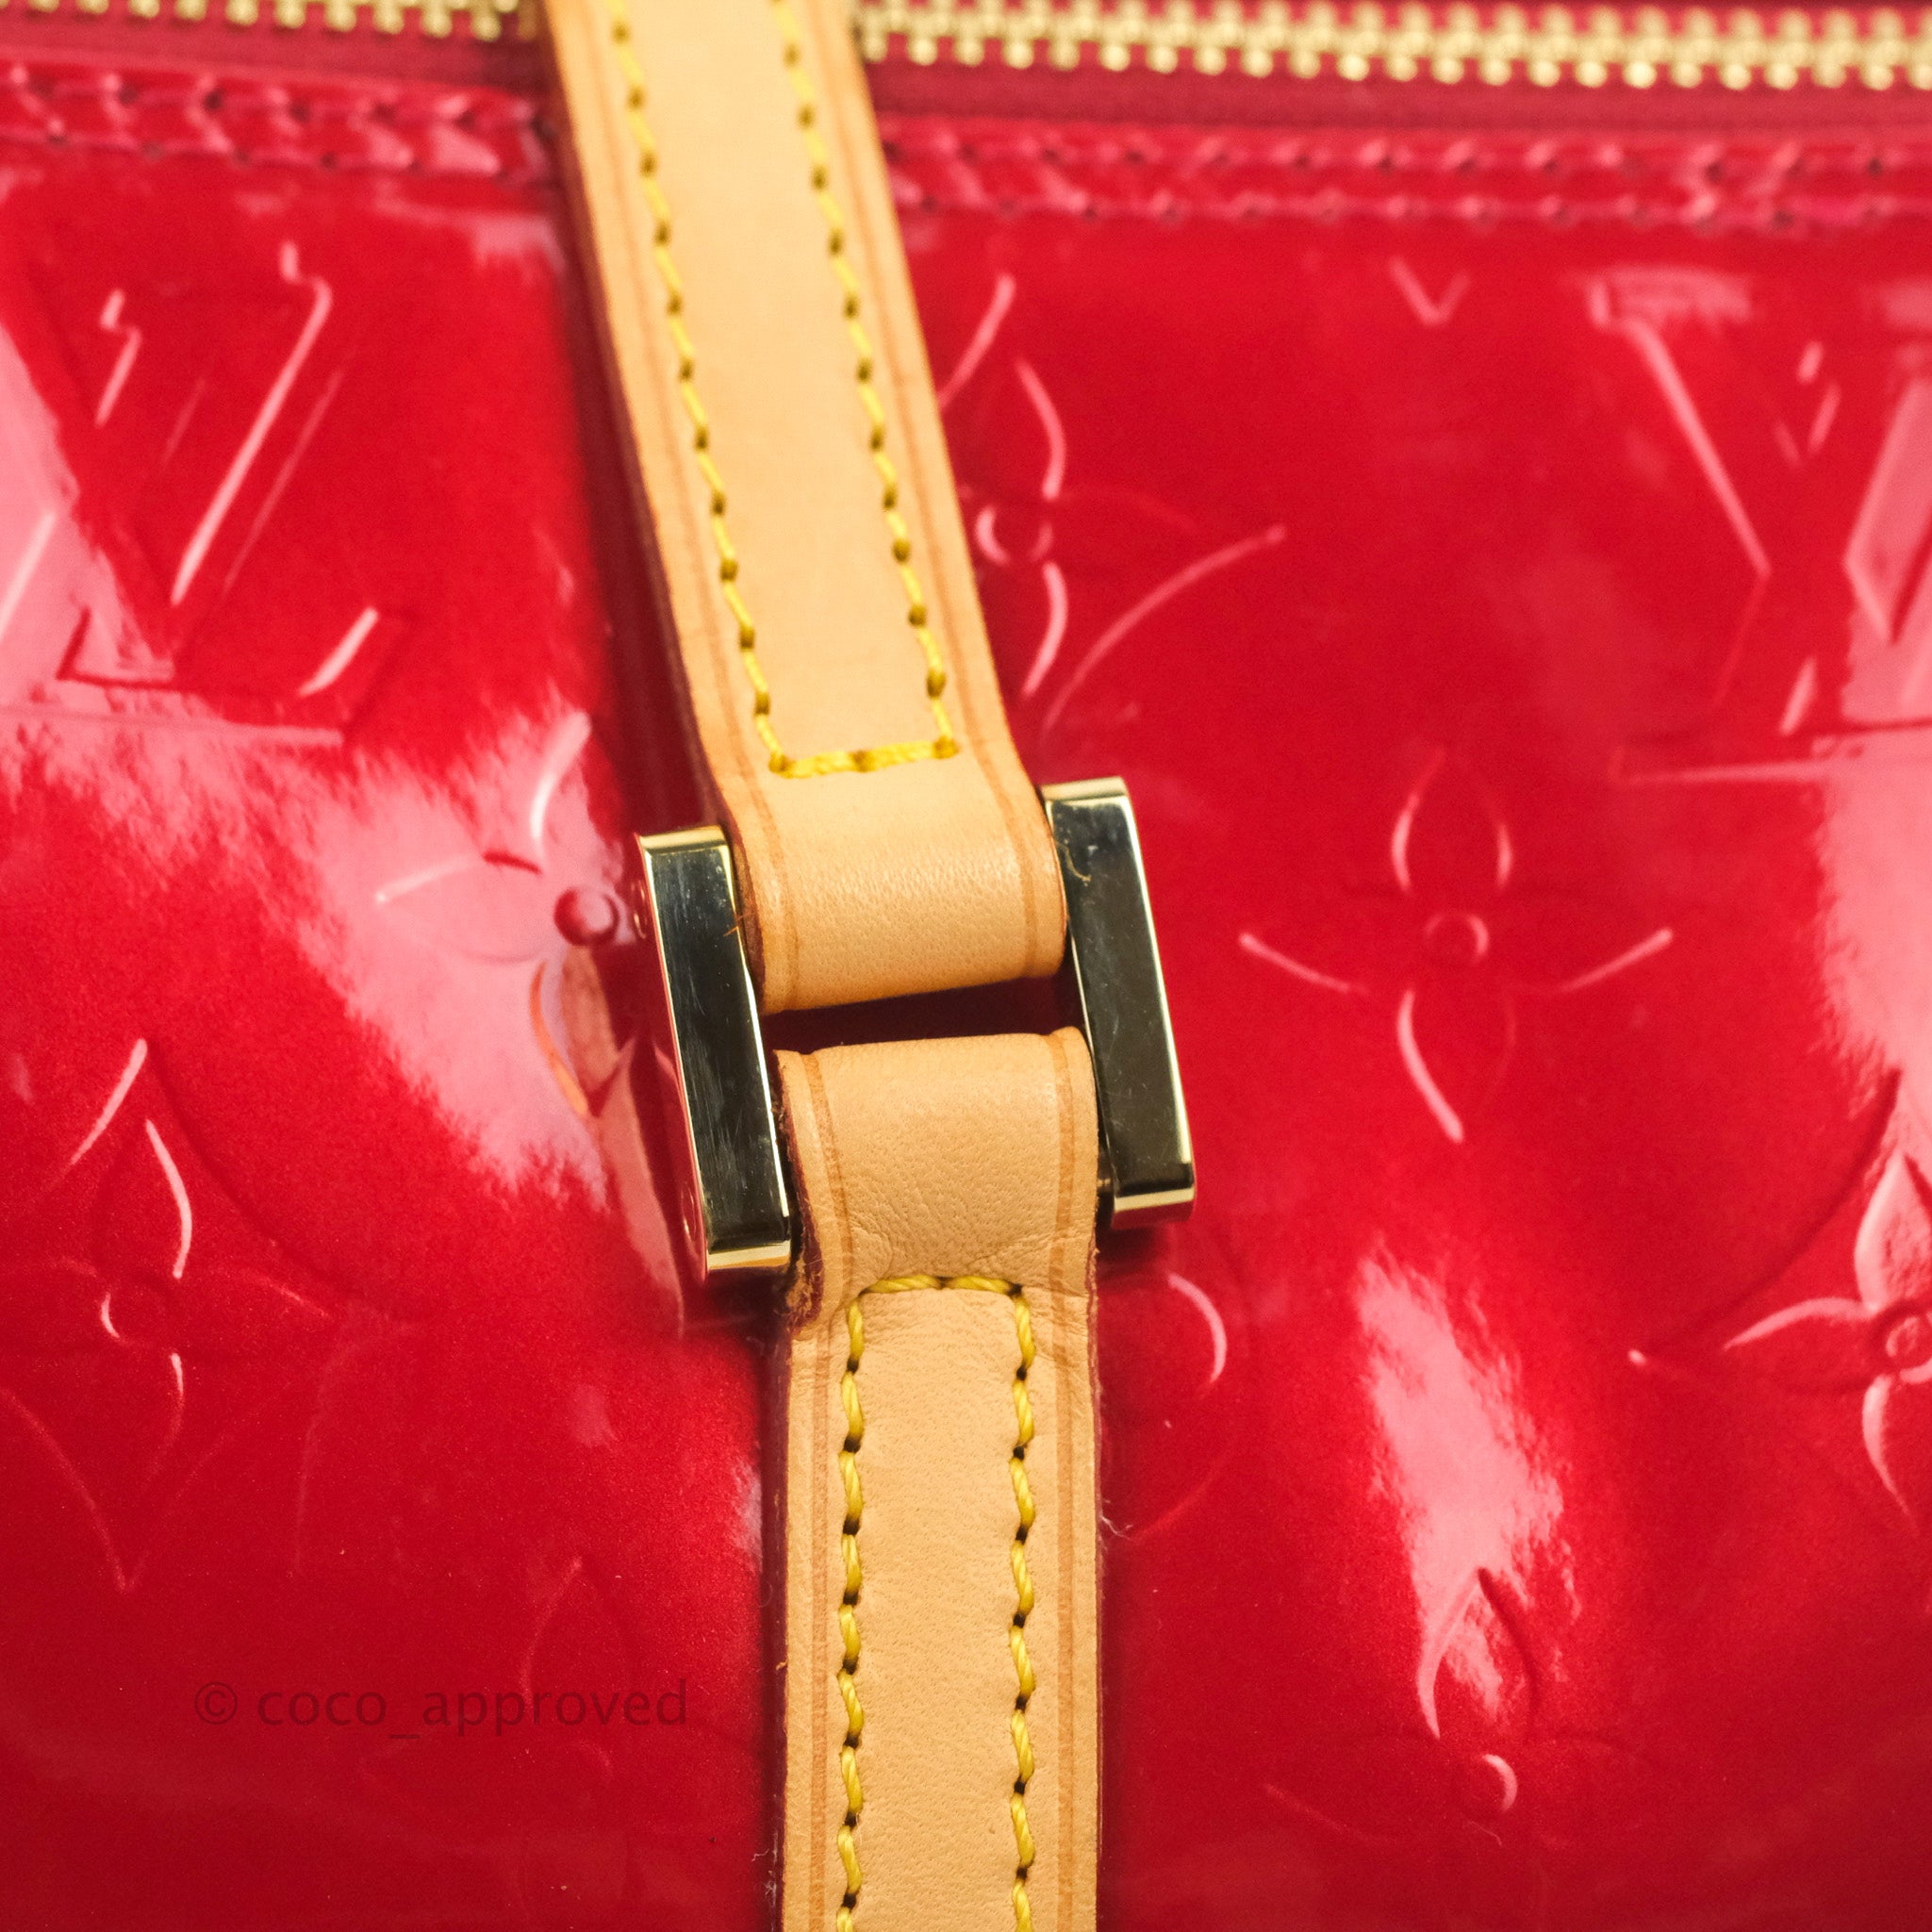 Sold at Auction: A LOUIS VUITTON MONOGRAM TOTE BAG WITH RED PATENT